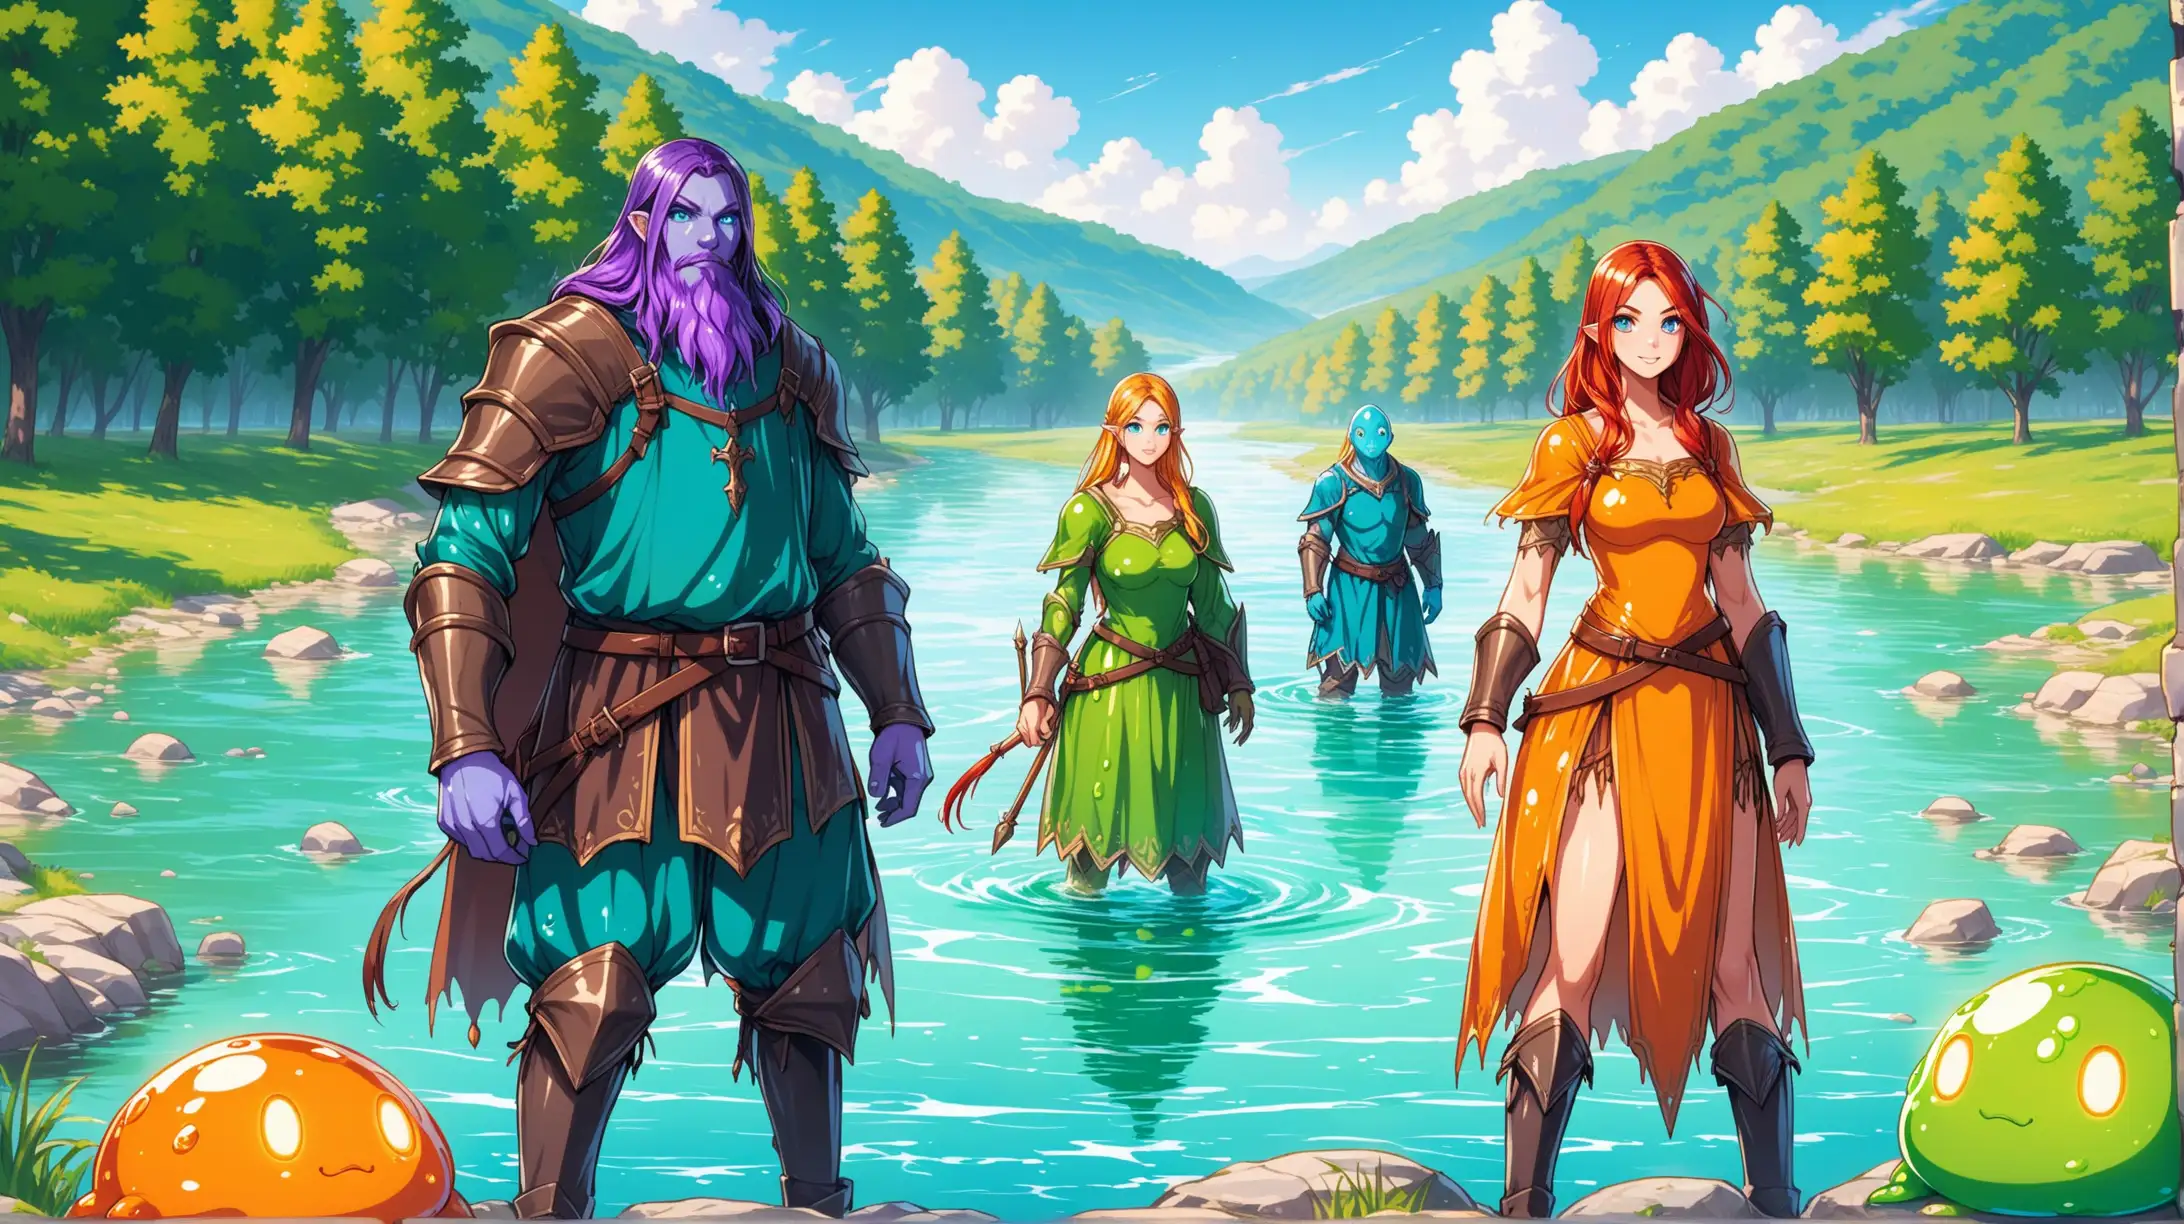 Colorful Slimefolk Gathering by the River in Medieval Fantasy Setting